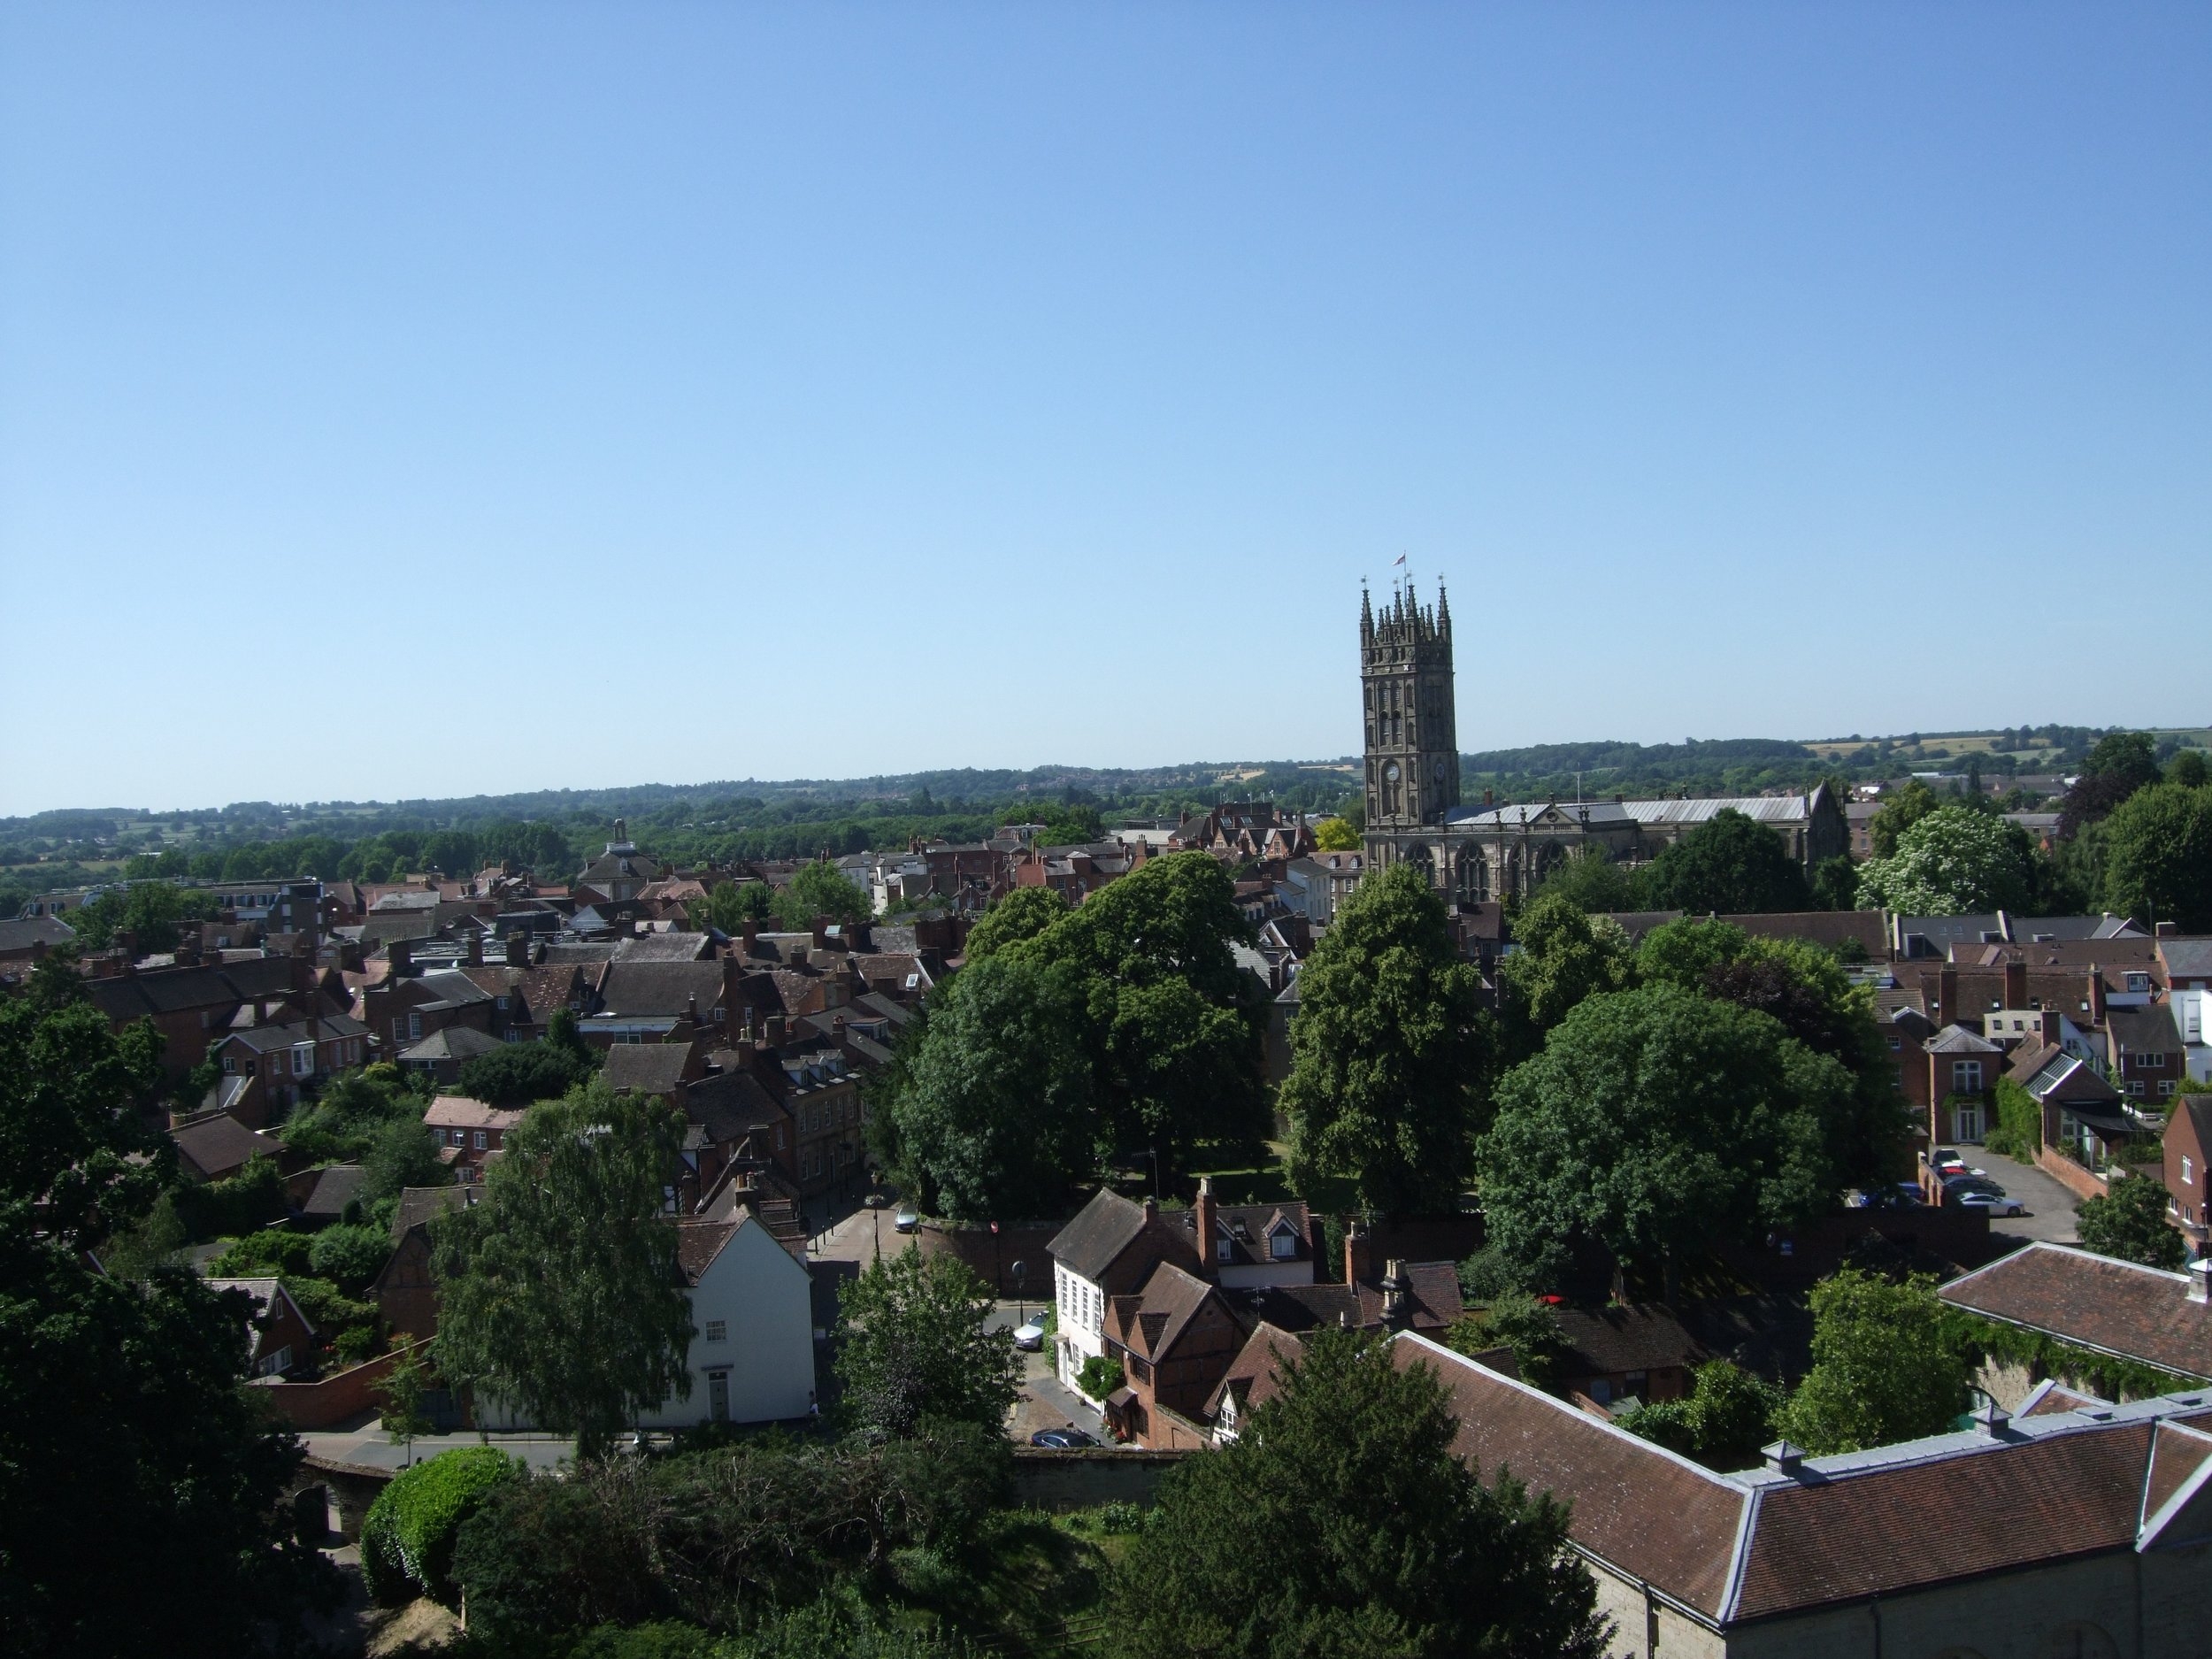  View from Warwick Castle, Coventry, June 2018 